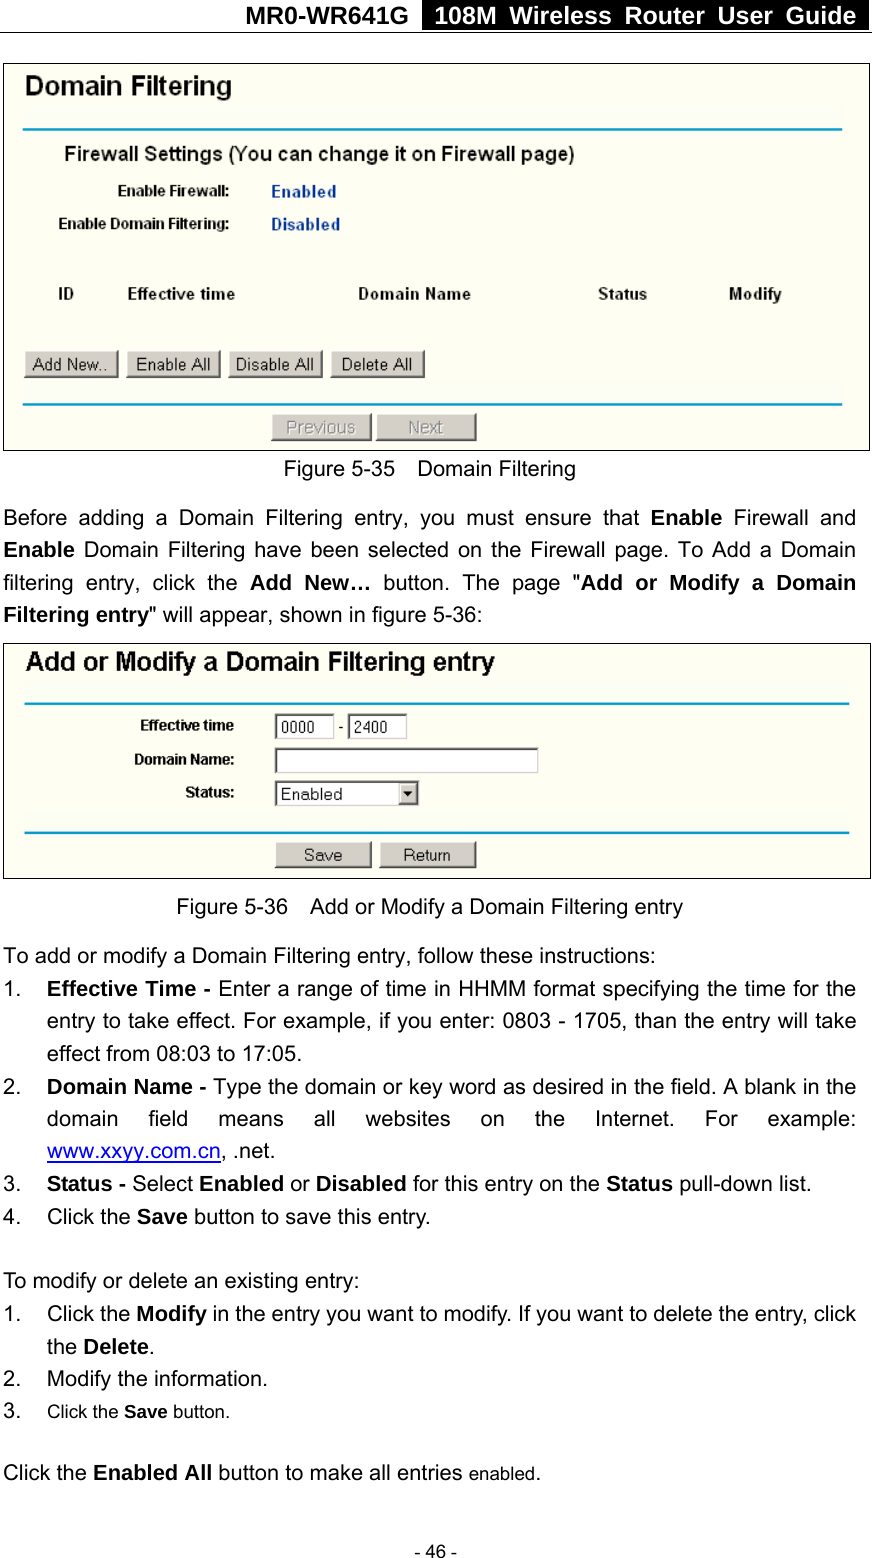 MR0-WR641G   108M Wireless Router User Guide   Figure 5-35  Domain Filtering Before adding a Domain Filtering entry, you must ensure that Enable Firewall and Enable Domain Filtering have been selected on the Firewall page. To Add a Domain filtering entry, click the Add New… button. The page &quot;Add or Modify a Domain Filtering entry&quot; will appear, shown in figure 5-36:  Figure 5-36    Add or Modify a Domain Filtering entry To add or modify a Domain Filtering entry, follow these instructions: 1.  Effective Time - Enter a range of time in HHMM format specifying the time for the entry to take effect. For example, if you enter: 0803 - 1705, than the entry will take effect from 08:03 to 17:05. 2.  Domain Name - Type the domain or key word as desired in the field. A blank in the domain field means all websites on the Internet. For example: www.xxyy.com.cn, .net. 3.  Status - Select Enabled or Disabled for this entry on the Status pull-down list. 4. Click the Save button to save this entry.  To modify or delete an existing entry: 1. Click the Modify in the entry you want to modify. If you want to delete the entry, click the Delete. 2.  Modify the information.   3.  Click the Save button. Click the Enabled All button to make all entries enabled.  - 46 - 